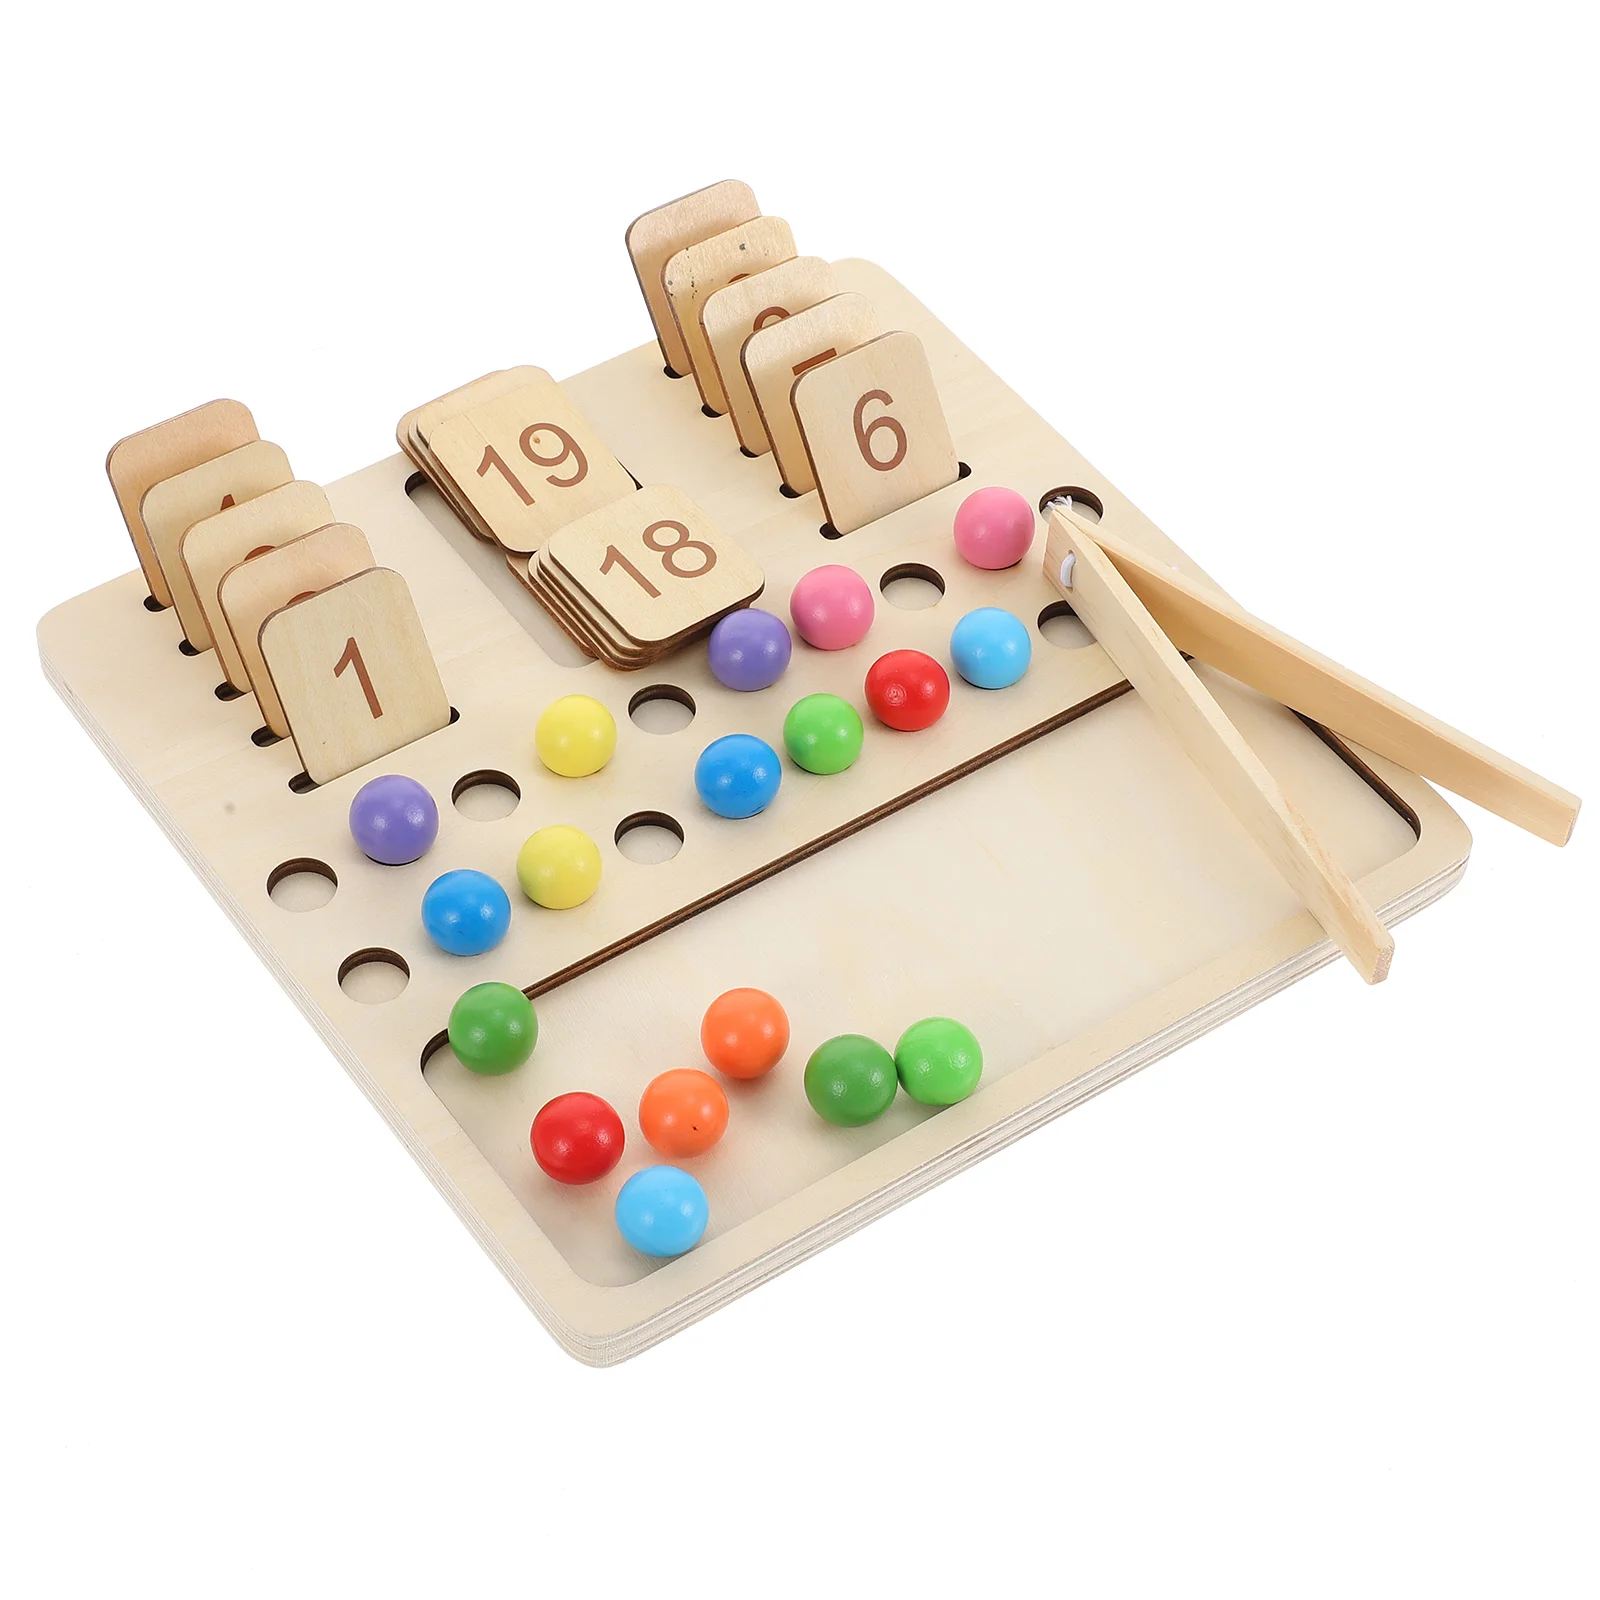 Digital Cognitive Board Toys Wooden Educational Teaching Supplies Playthings Aids Arithmetic Boards Math Learning 3d rotate slide cylinder arithmetic toys montessori math cubes kids learning juegos educativos para niños 3 4 5 6 7 10 12 años